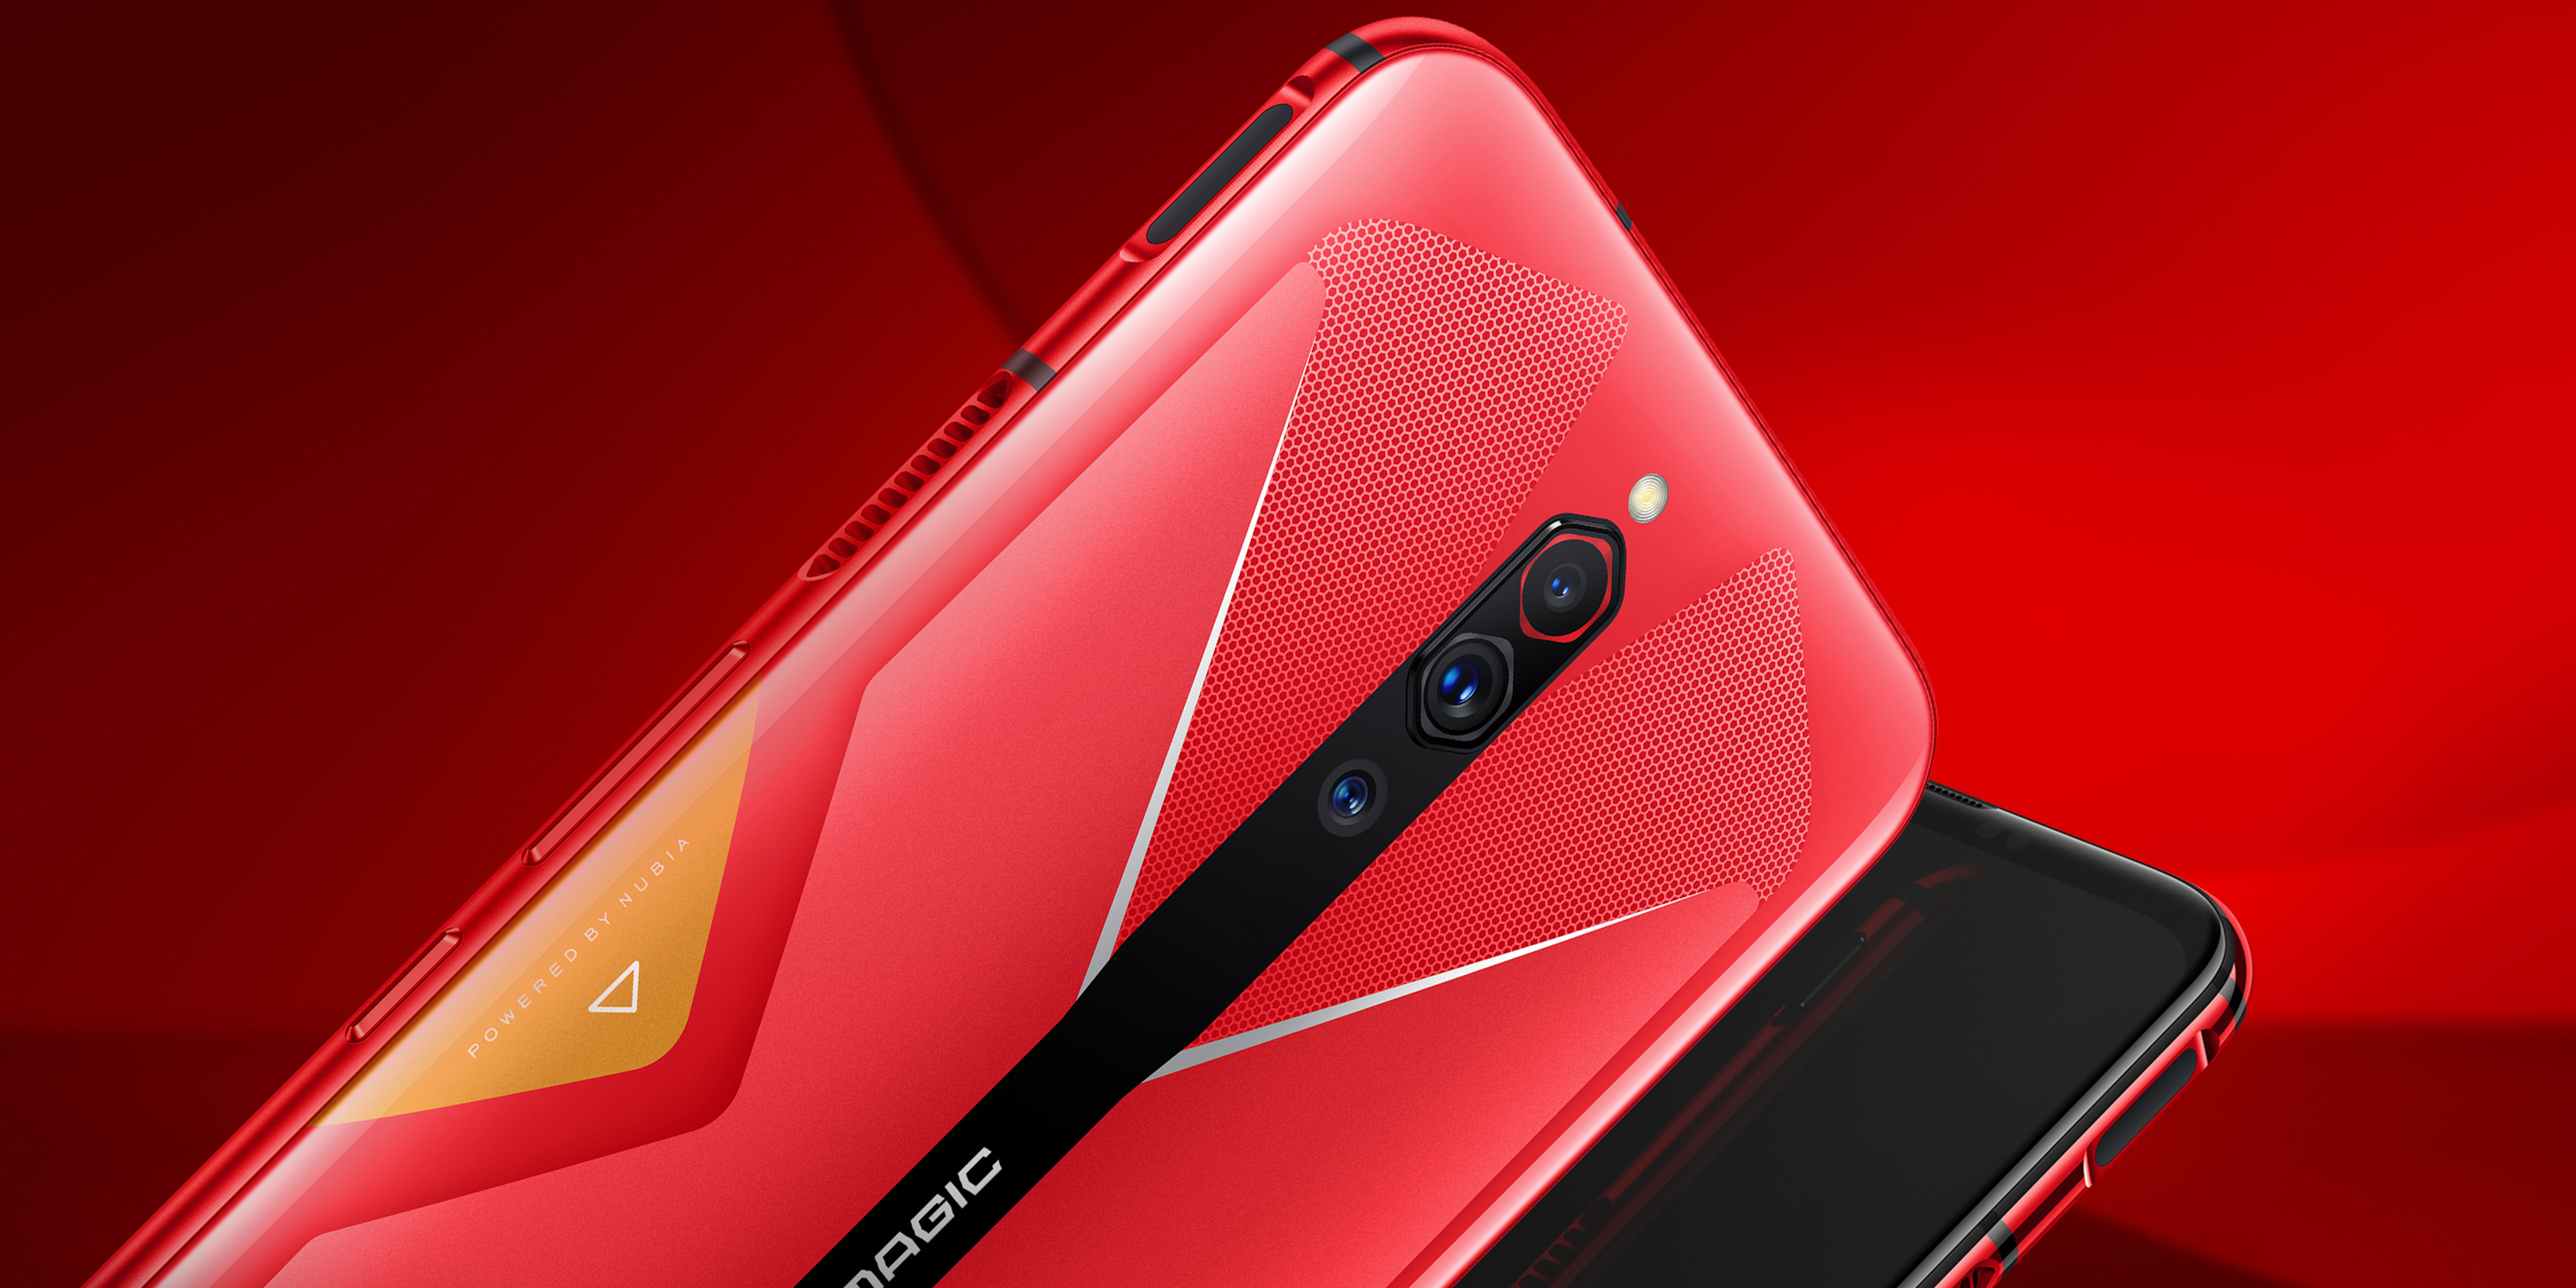 Red Magic 5G gaming phone official w/ 144Hz display - 9to5Google